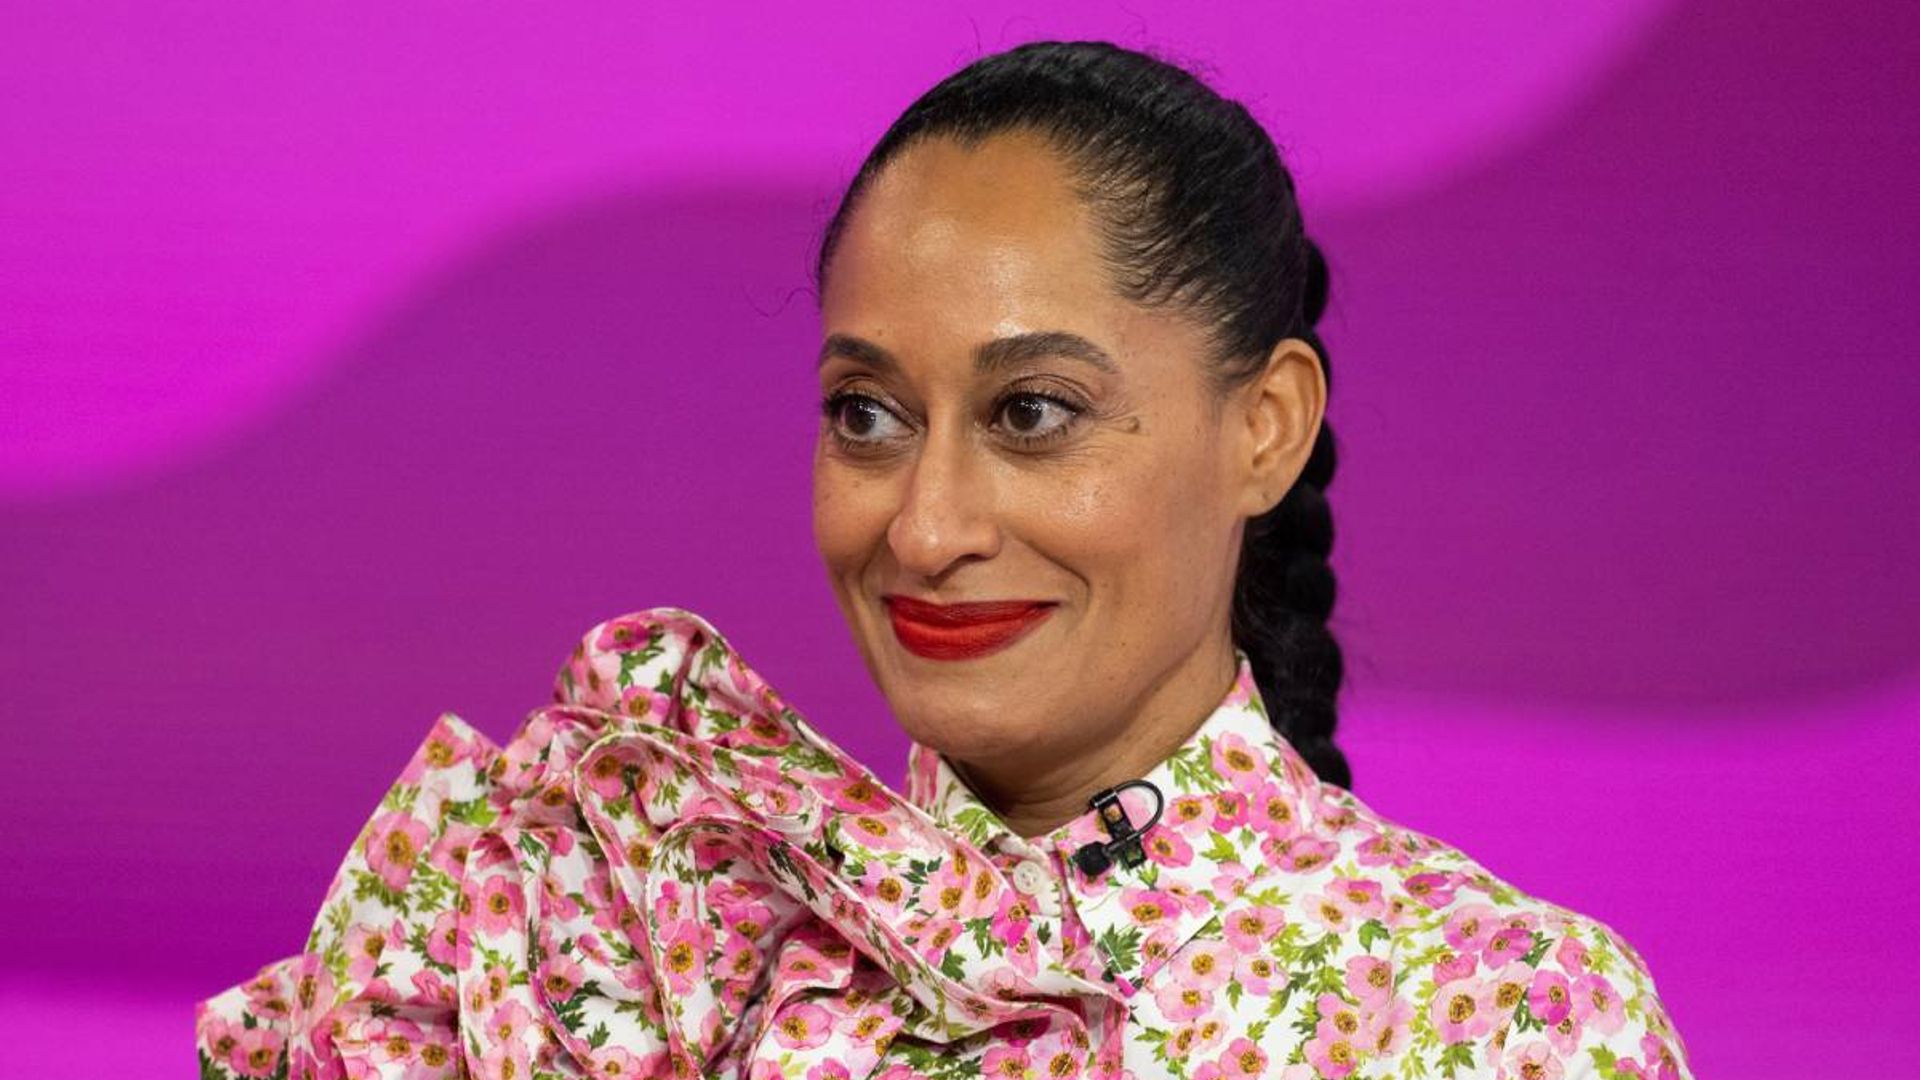 Tracee Ellis Ross sets pulses racing with striking swimsuit photos while on vacation